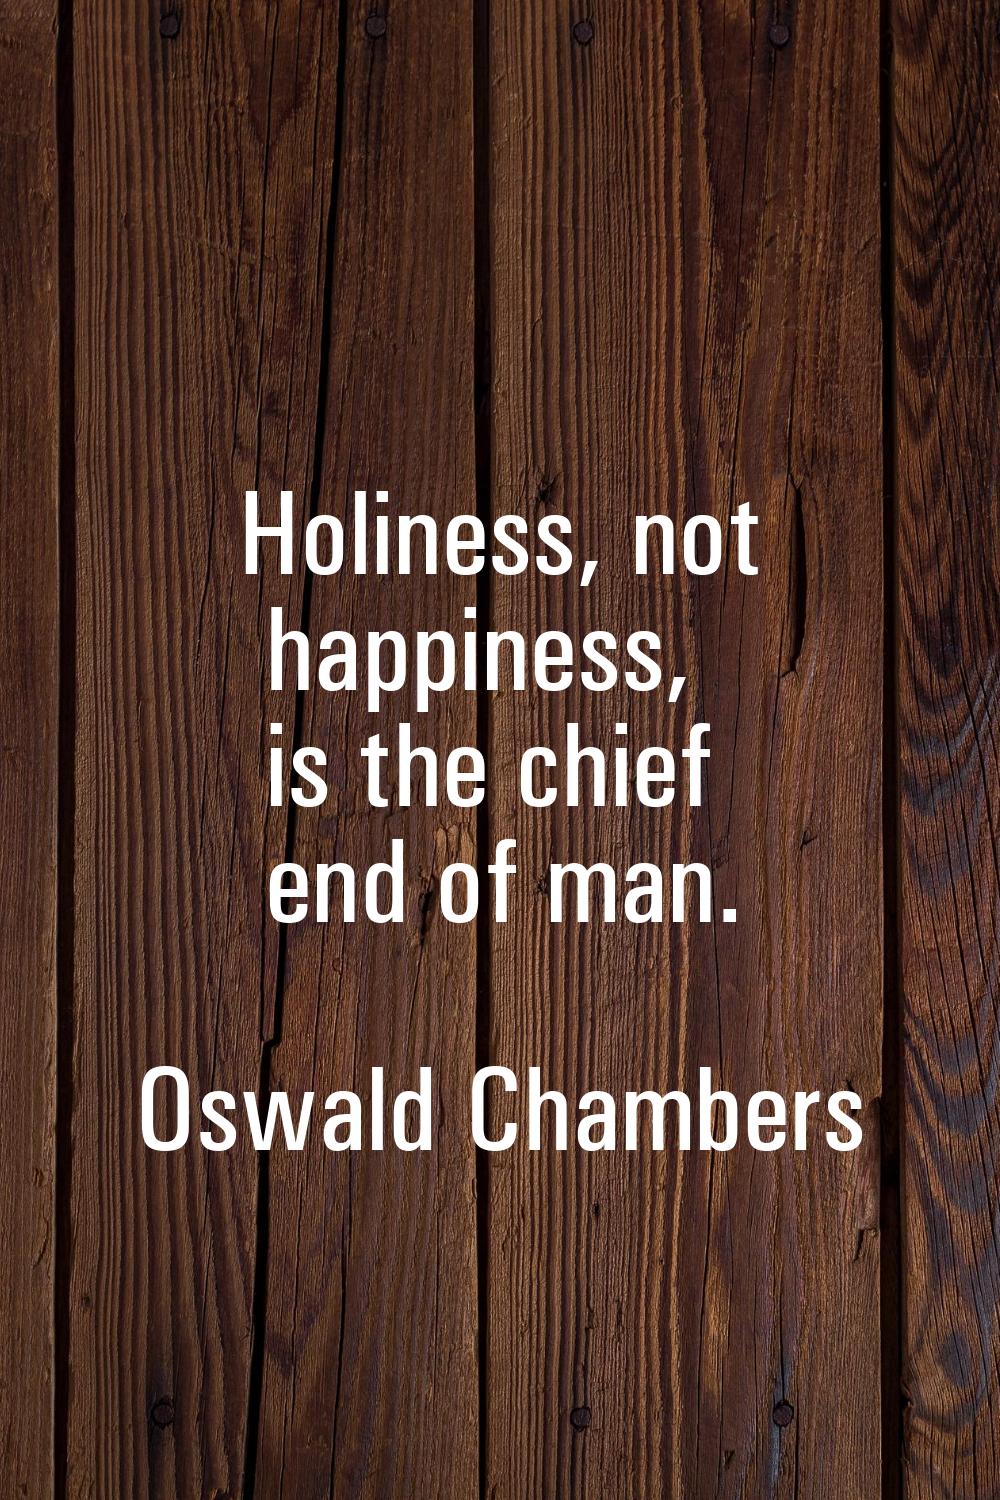 Holiness, not happiness, is the chief end of man.